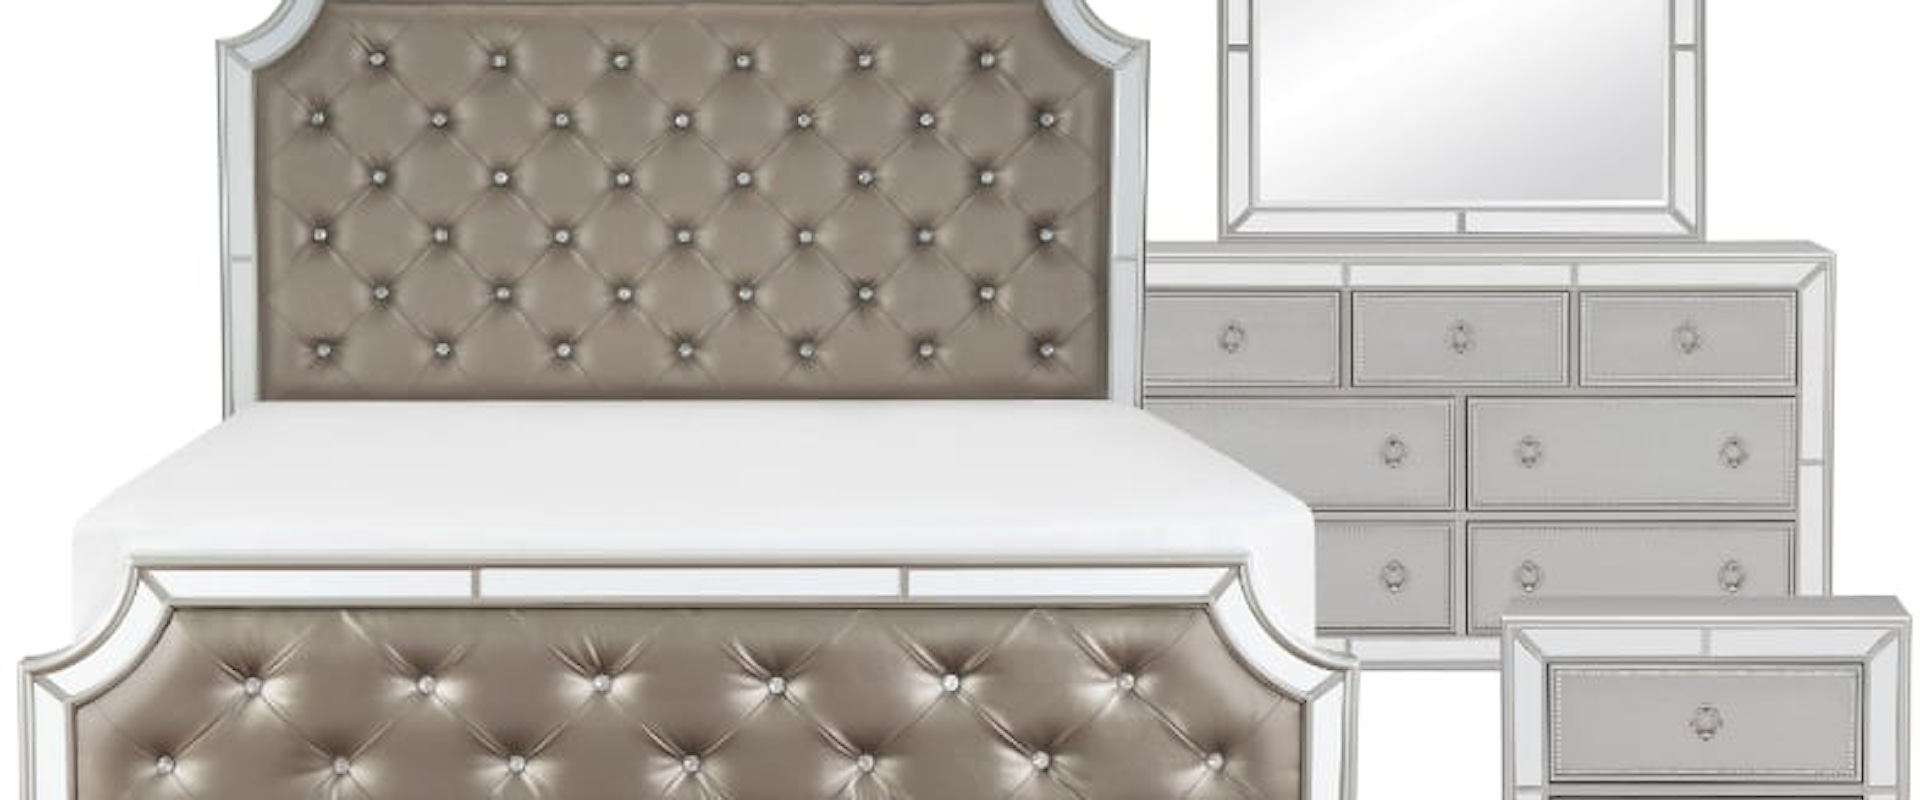 Glam 4-Piece Queen Bedroom Set with Crystal Button Tufted Upholstery Bed